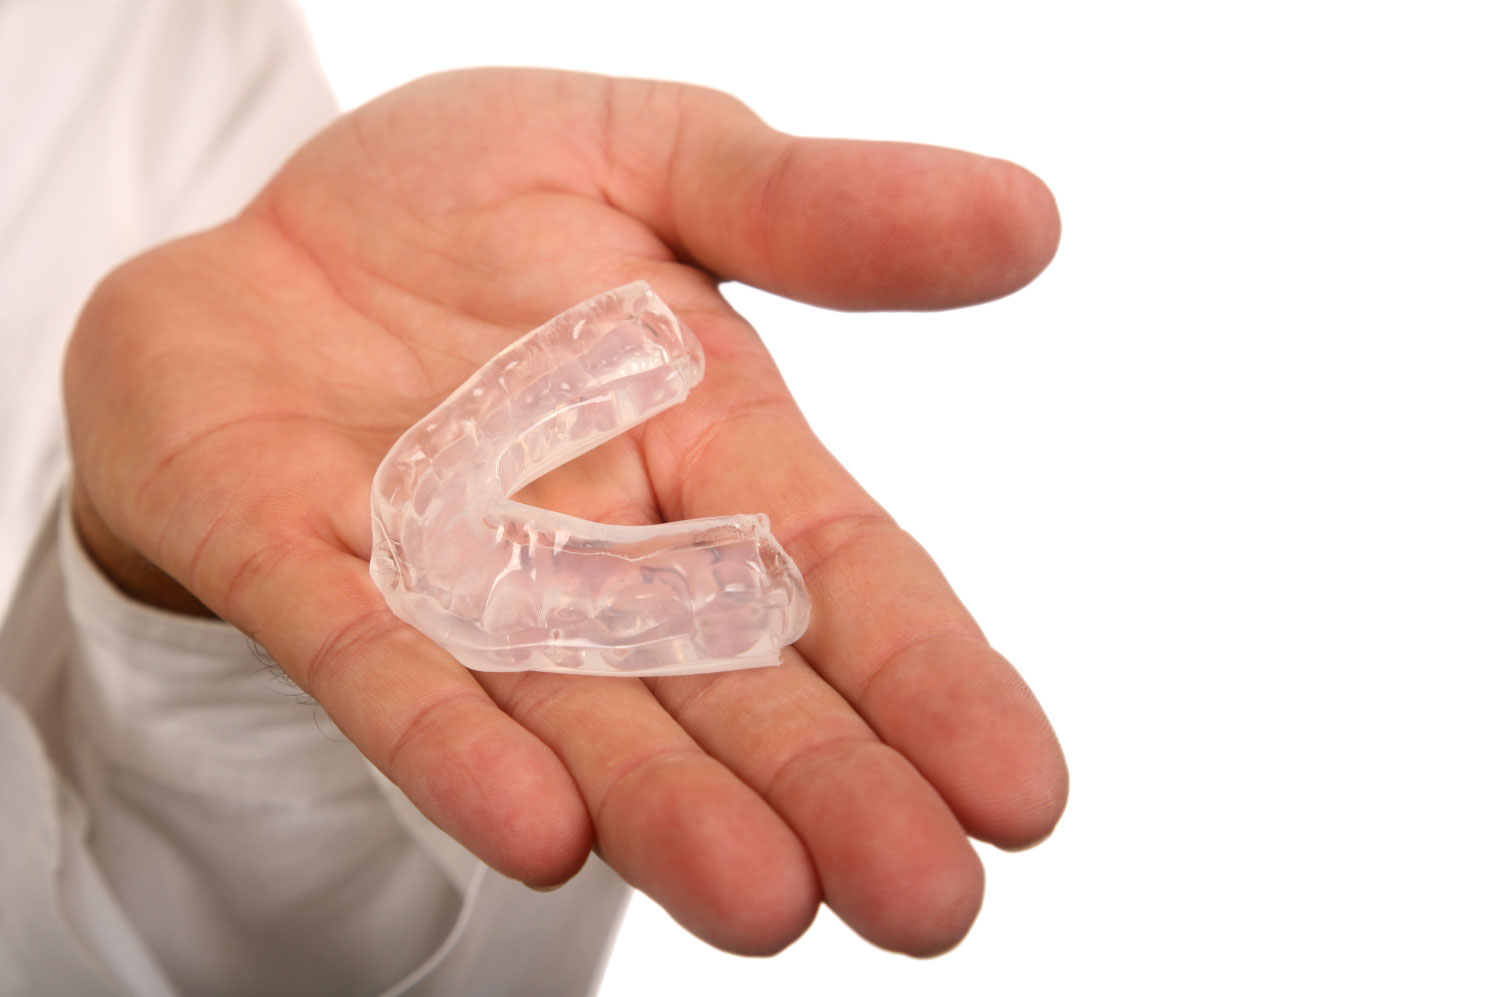 6 Ways A Mouthguard Can Protect You During Contact Sports